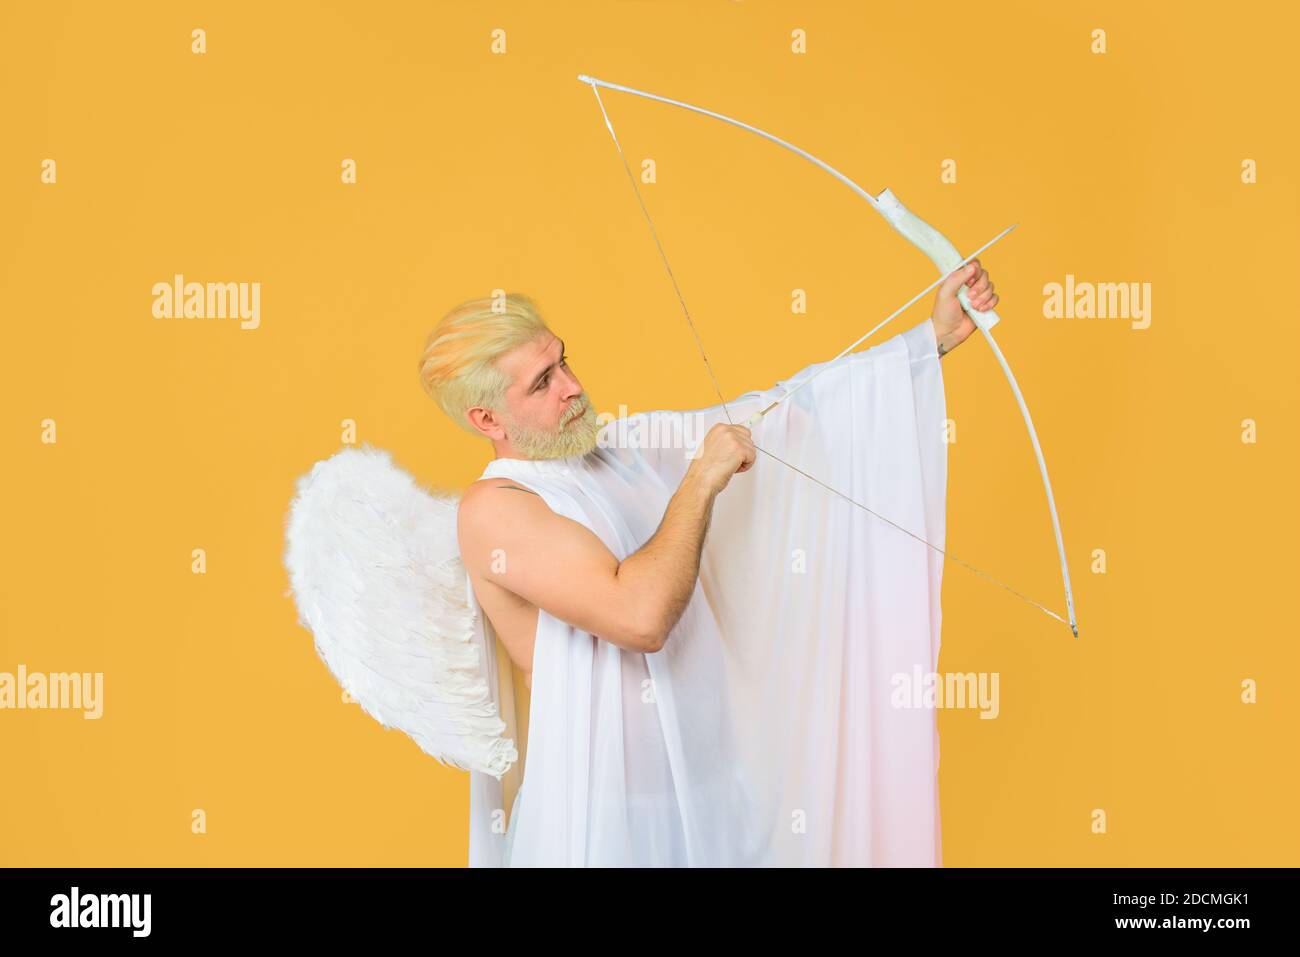 Valentines Day. Valentines cupid. Arrow of love. Cupid throws arrow with bow. Bearded angel with bow and arrow. Cupid angel with bow and arrows Stock Photo